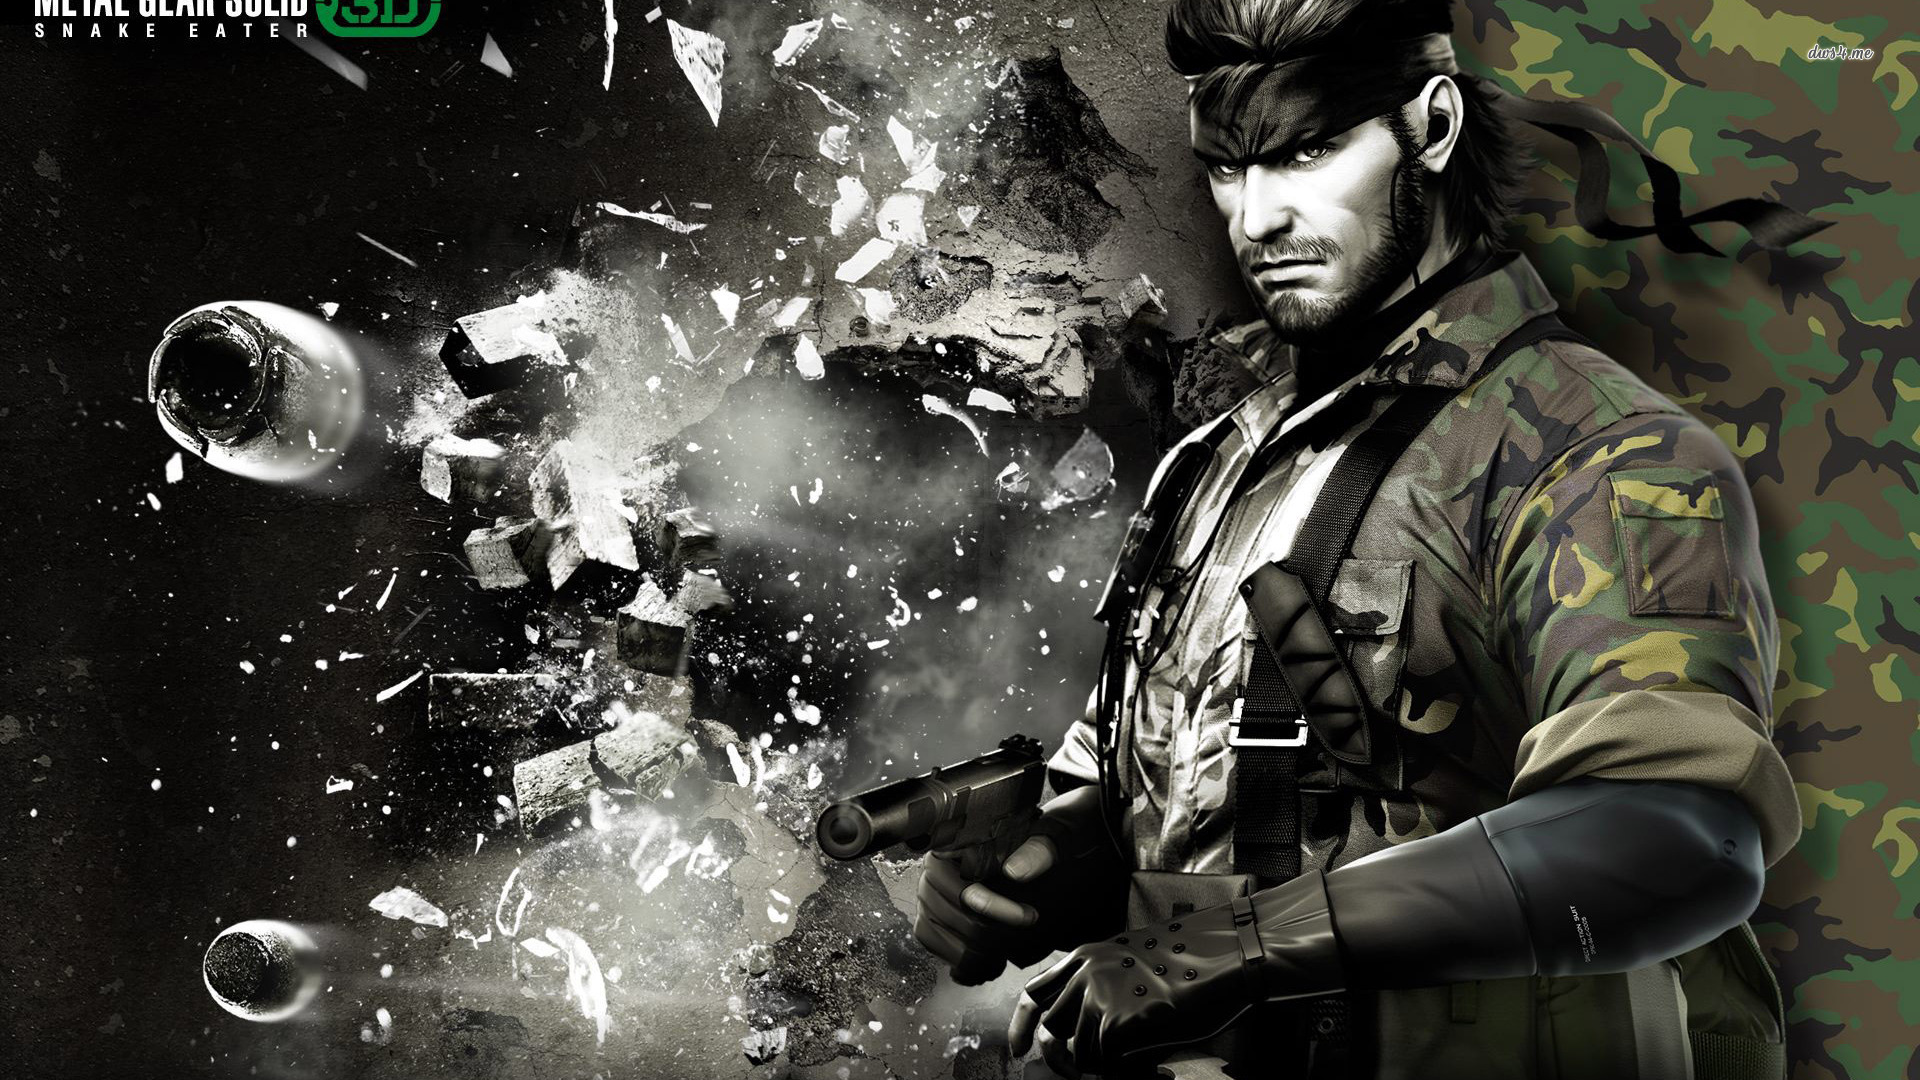 Free Download Metal Gear Solid 3 Snake Eater Wallpaper Game Wallpapers 7977 19x1080 For Your Desktop Mobile Tablet Explore 76 Mgs 3 Wallpaper Metal Gear Solid 3 Wallpaper Metal Gear Solid 4 Wallpaper Snake Eater Wallpaper